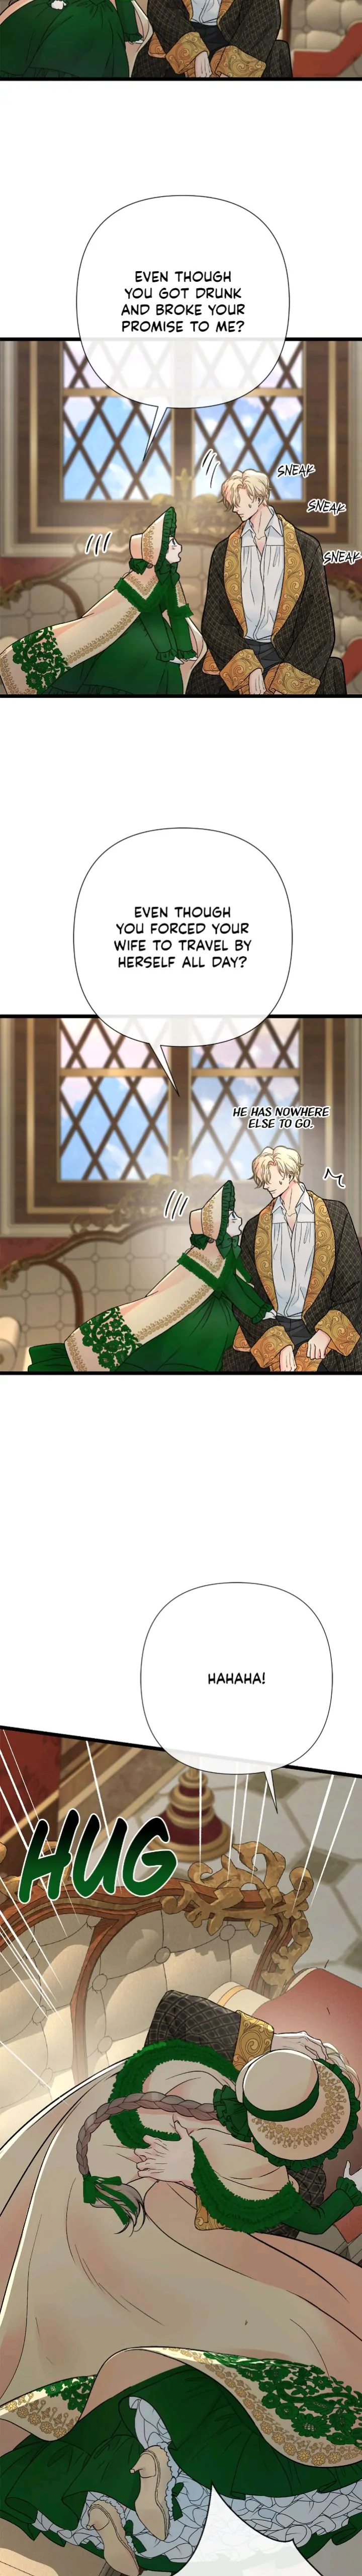 The Problematic Prince chapter 53